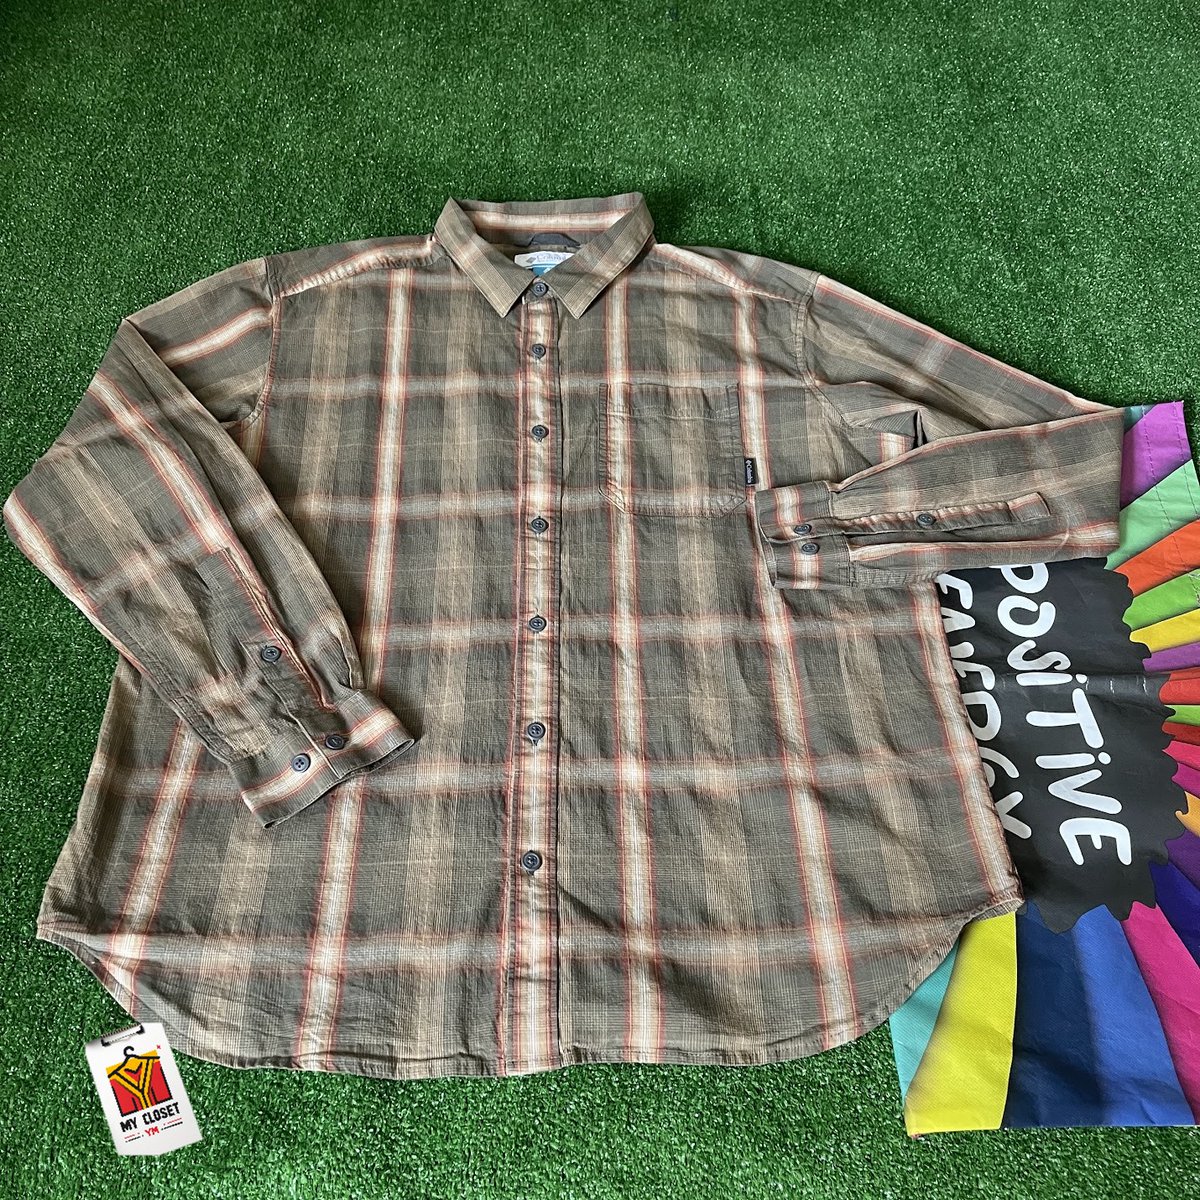 Columbia Long Sleeve Button Down Regular Fit Brown Plaid Casual Shirt Size XL

#ColumbiaFashion
#ShortSleeveShirt
#ButtonDown
#RegularFit
#BluePlaid
#CasualShirt
#SizeXL
#OutdoorApparel
#EverydayWear
#ClassicStyle
ebay.com/itm/1264803186…